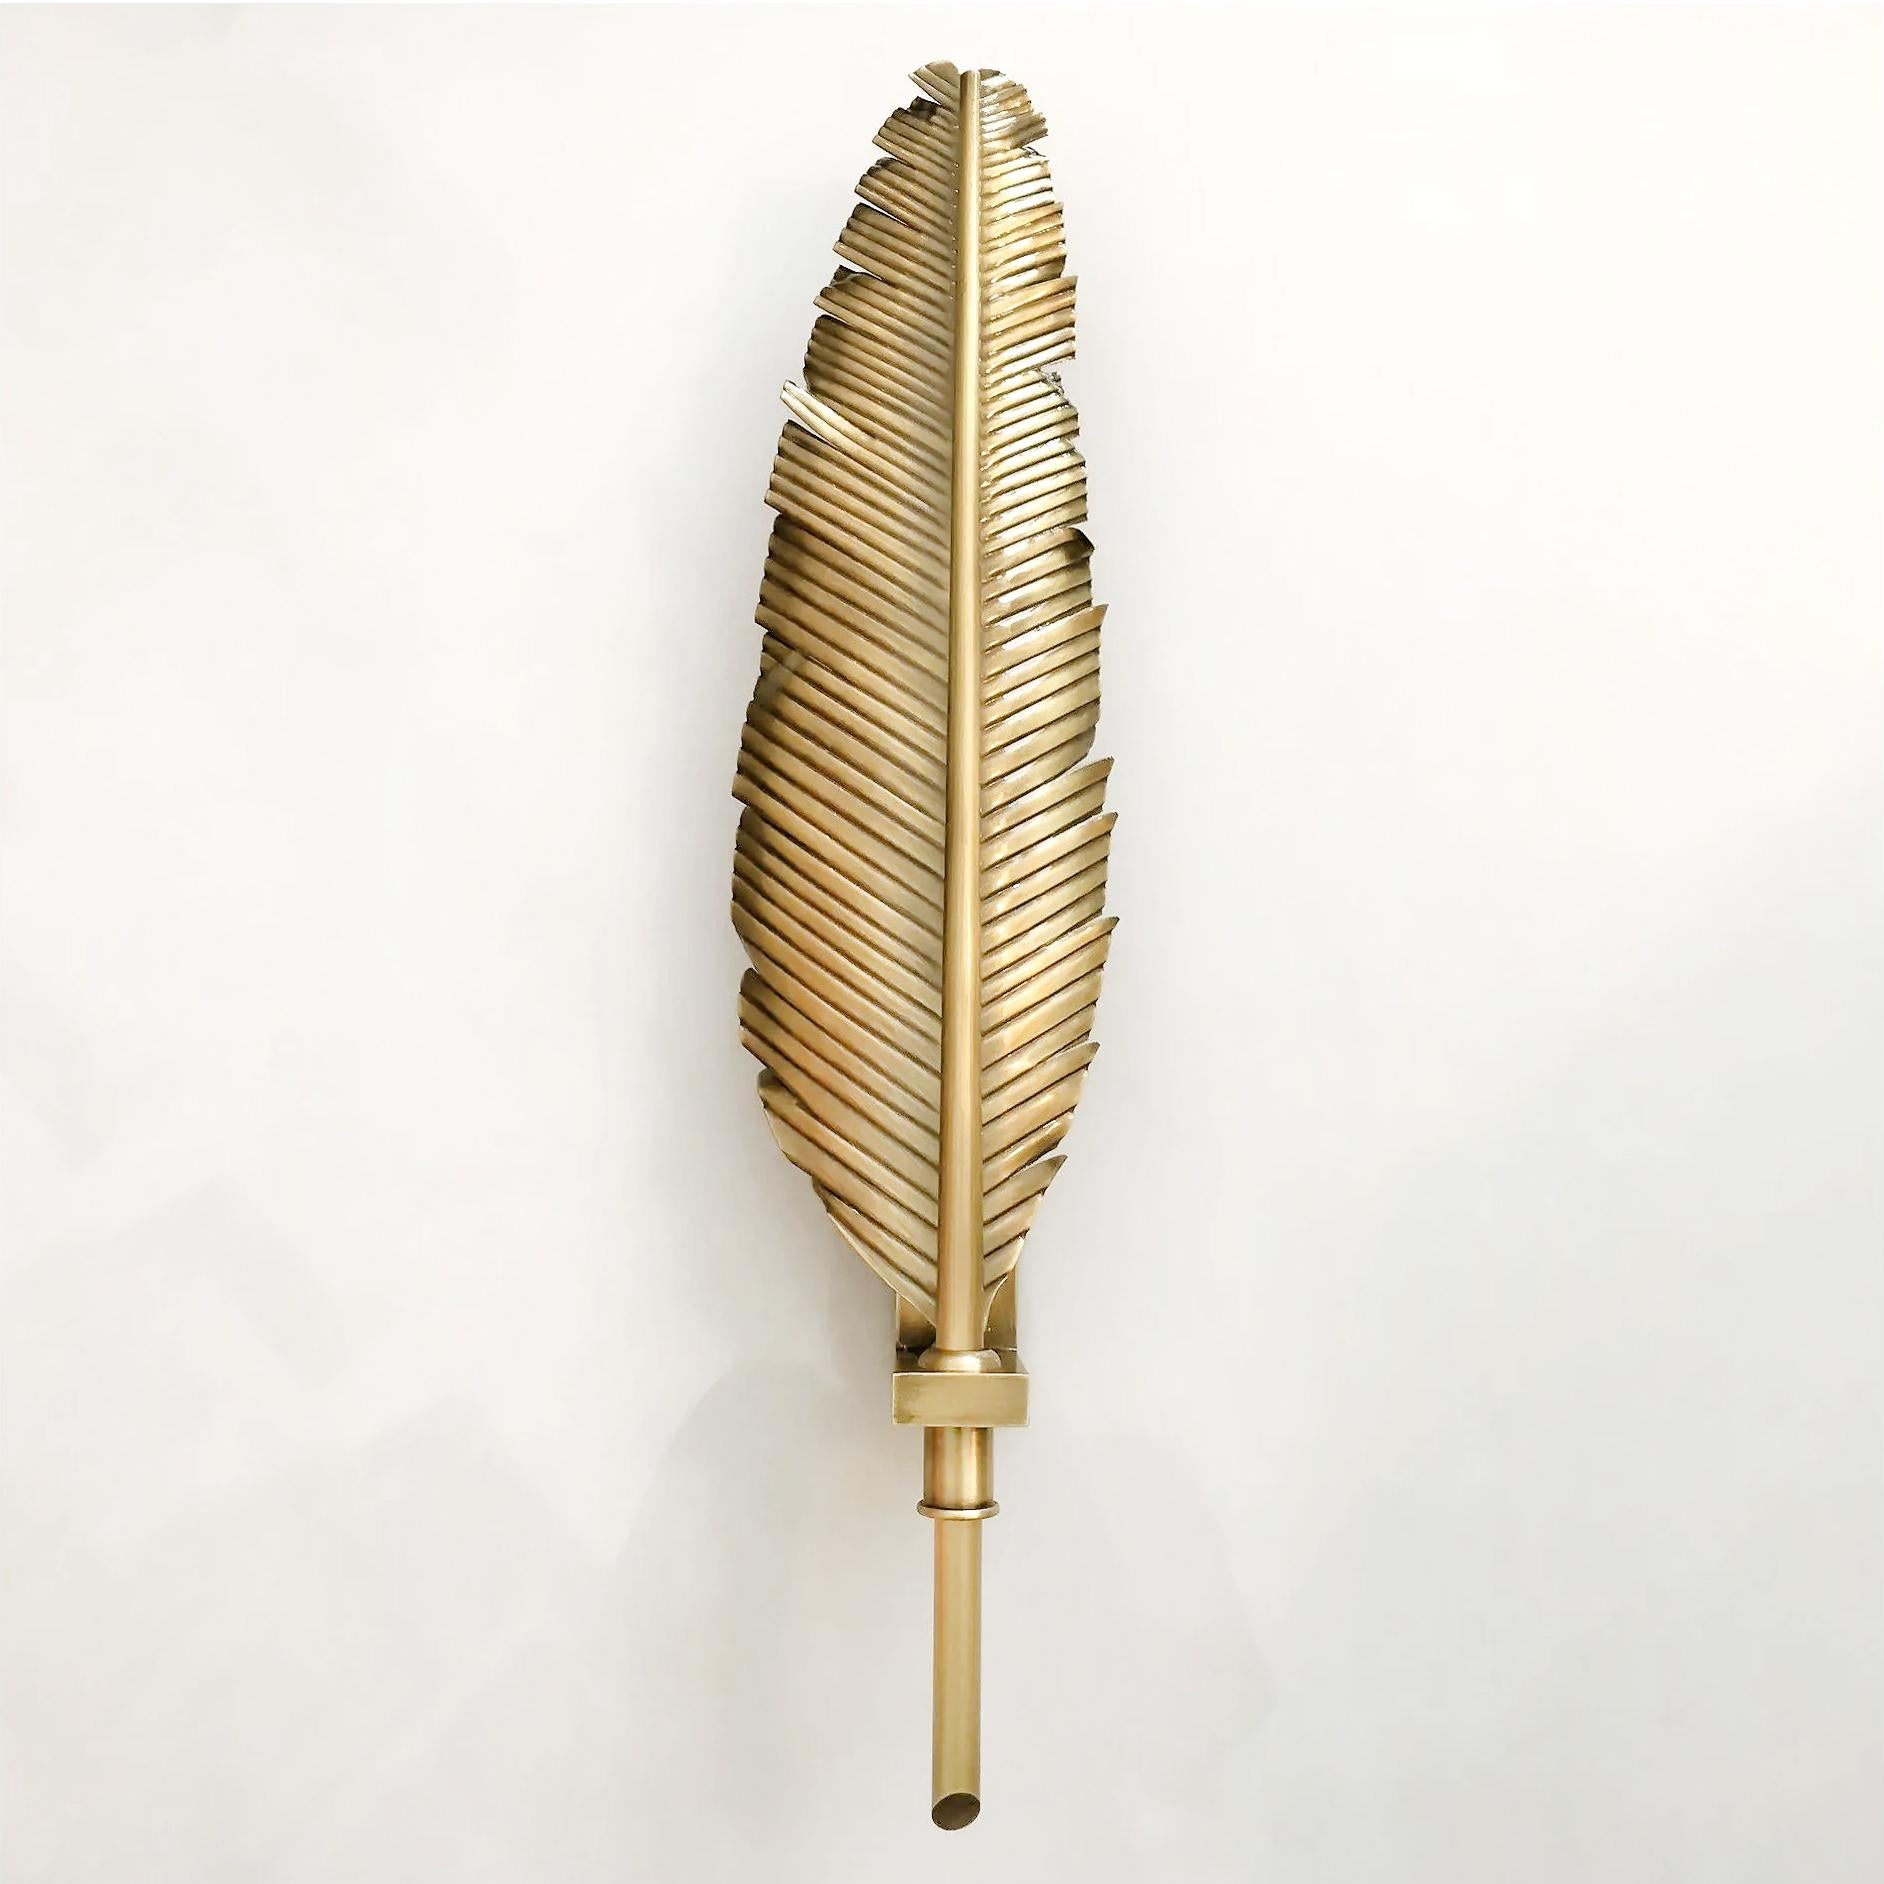 Pair of wall lights shaped as feathers. Wall-mounted, with indirect light, made of brass.
Measure: Height circa 60 cm [23 in.].
These lights are entirely hand-made and they are available in different finishes (see the color table).
Standard